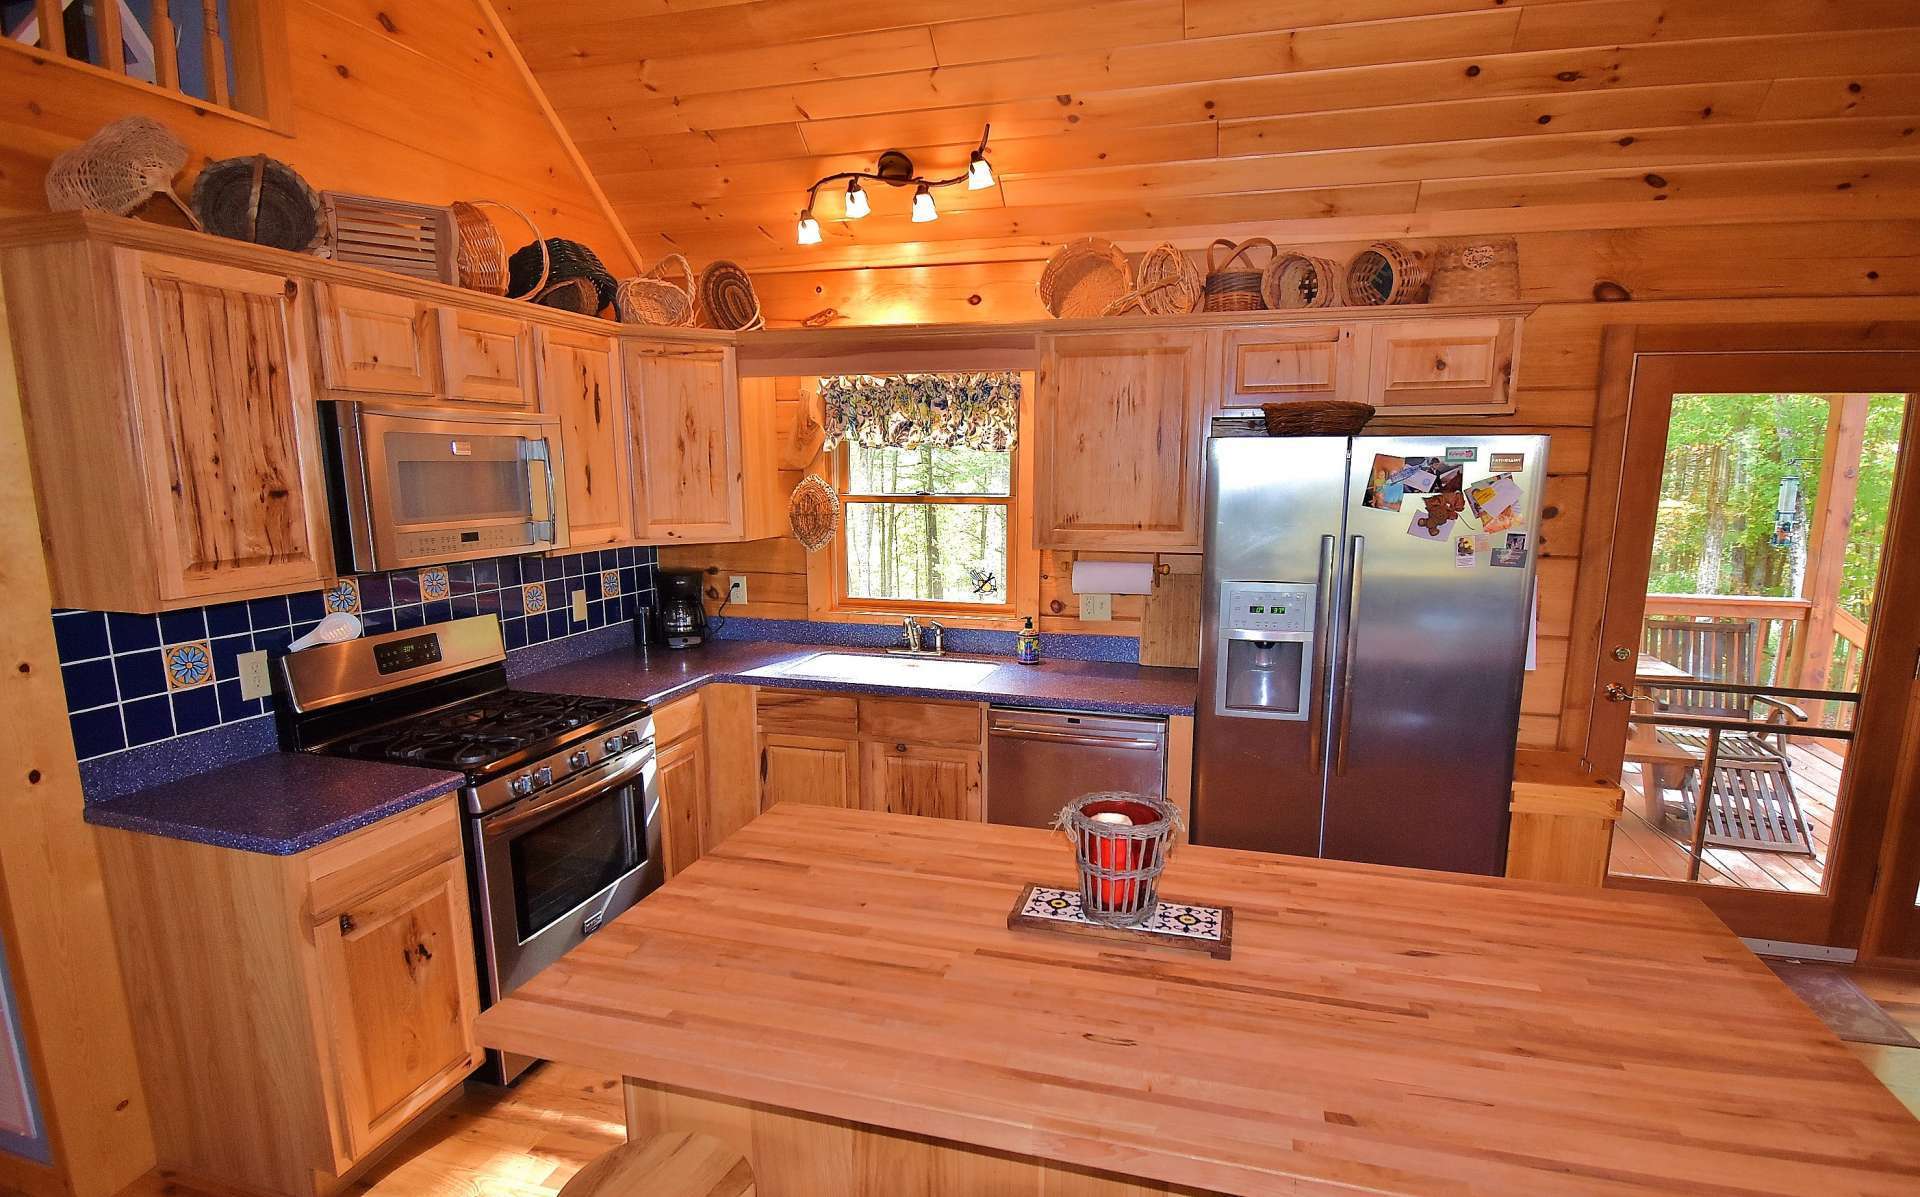 A fully equipped kitchen features stainless appliances, Hickory cabinetry, plenty of work and storage space, and easy access to the back deck for outdoor grilling and dining.